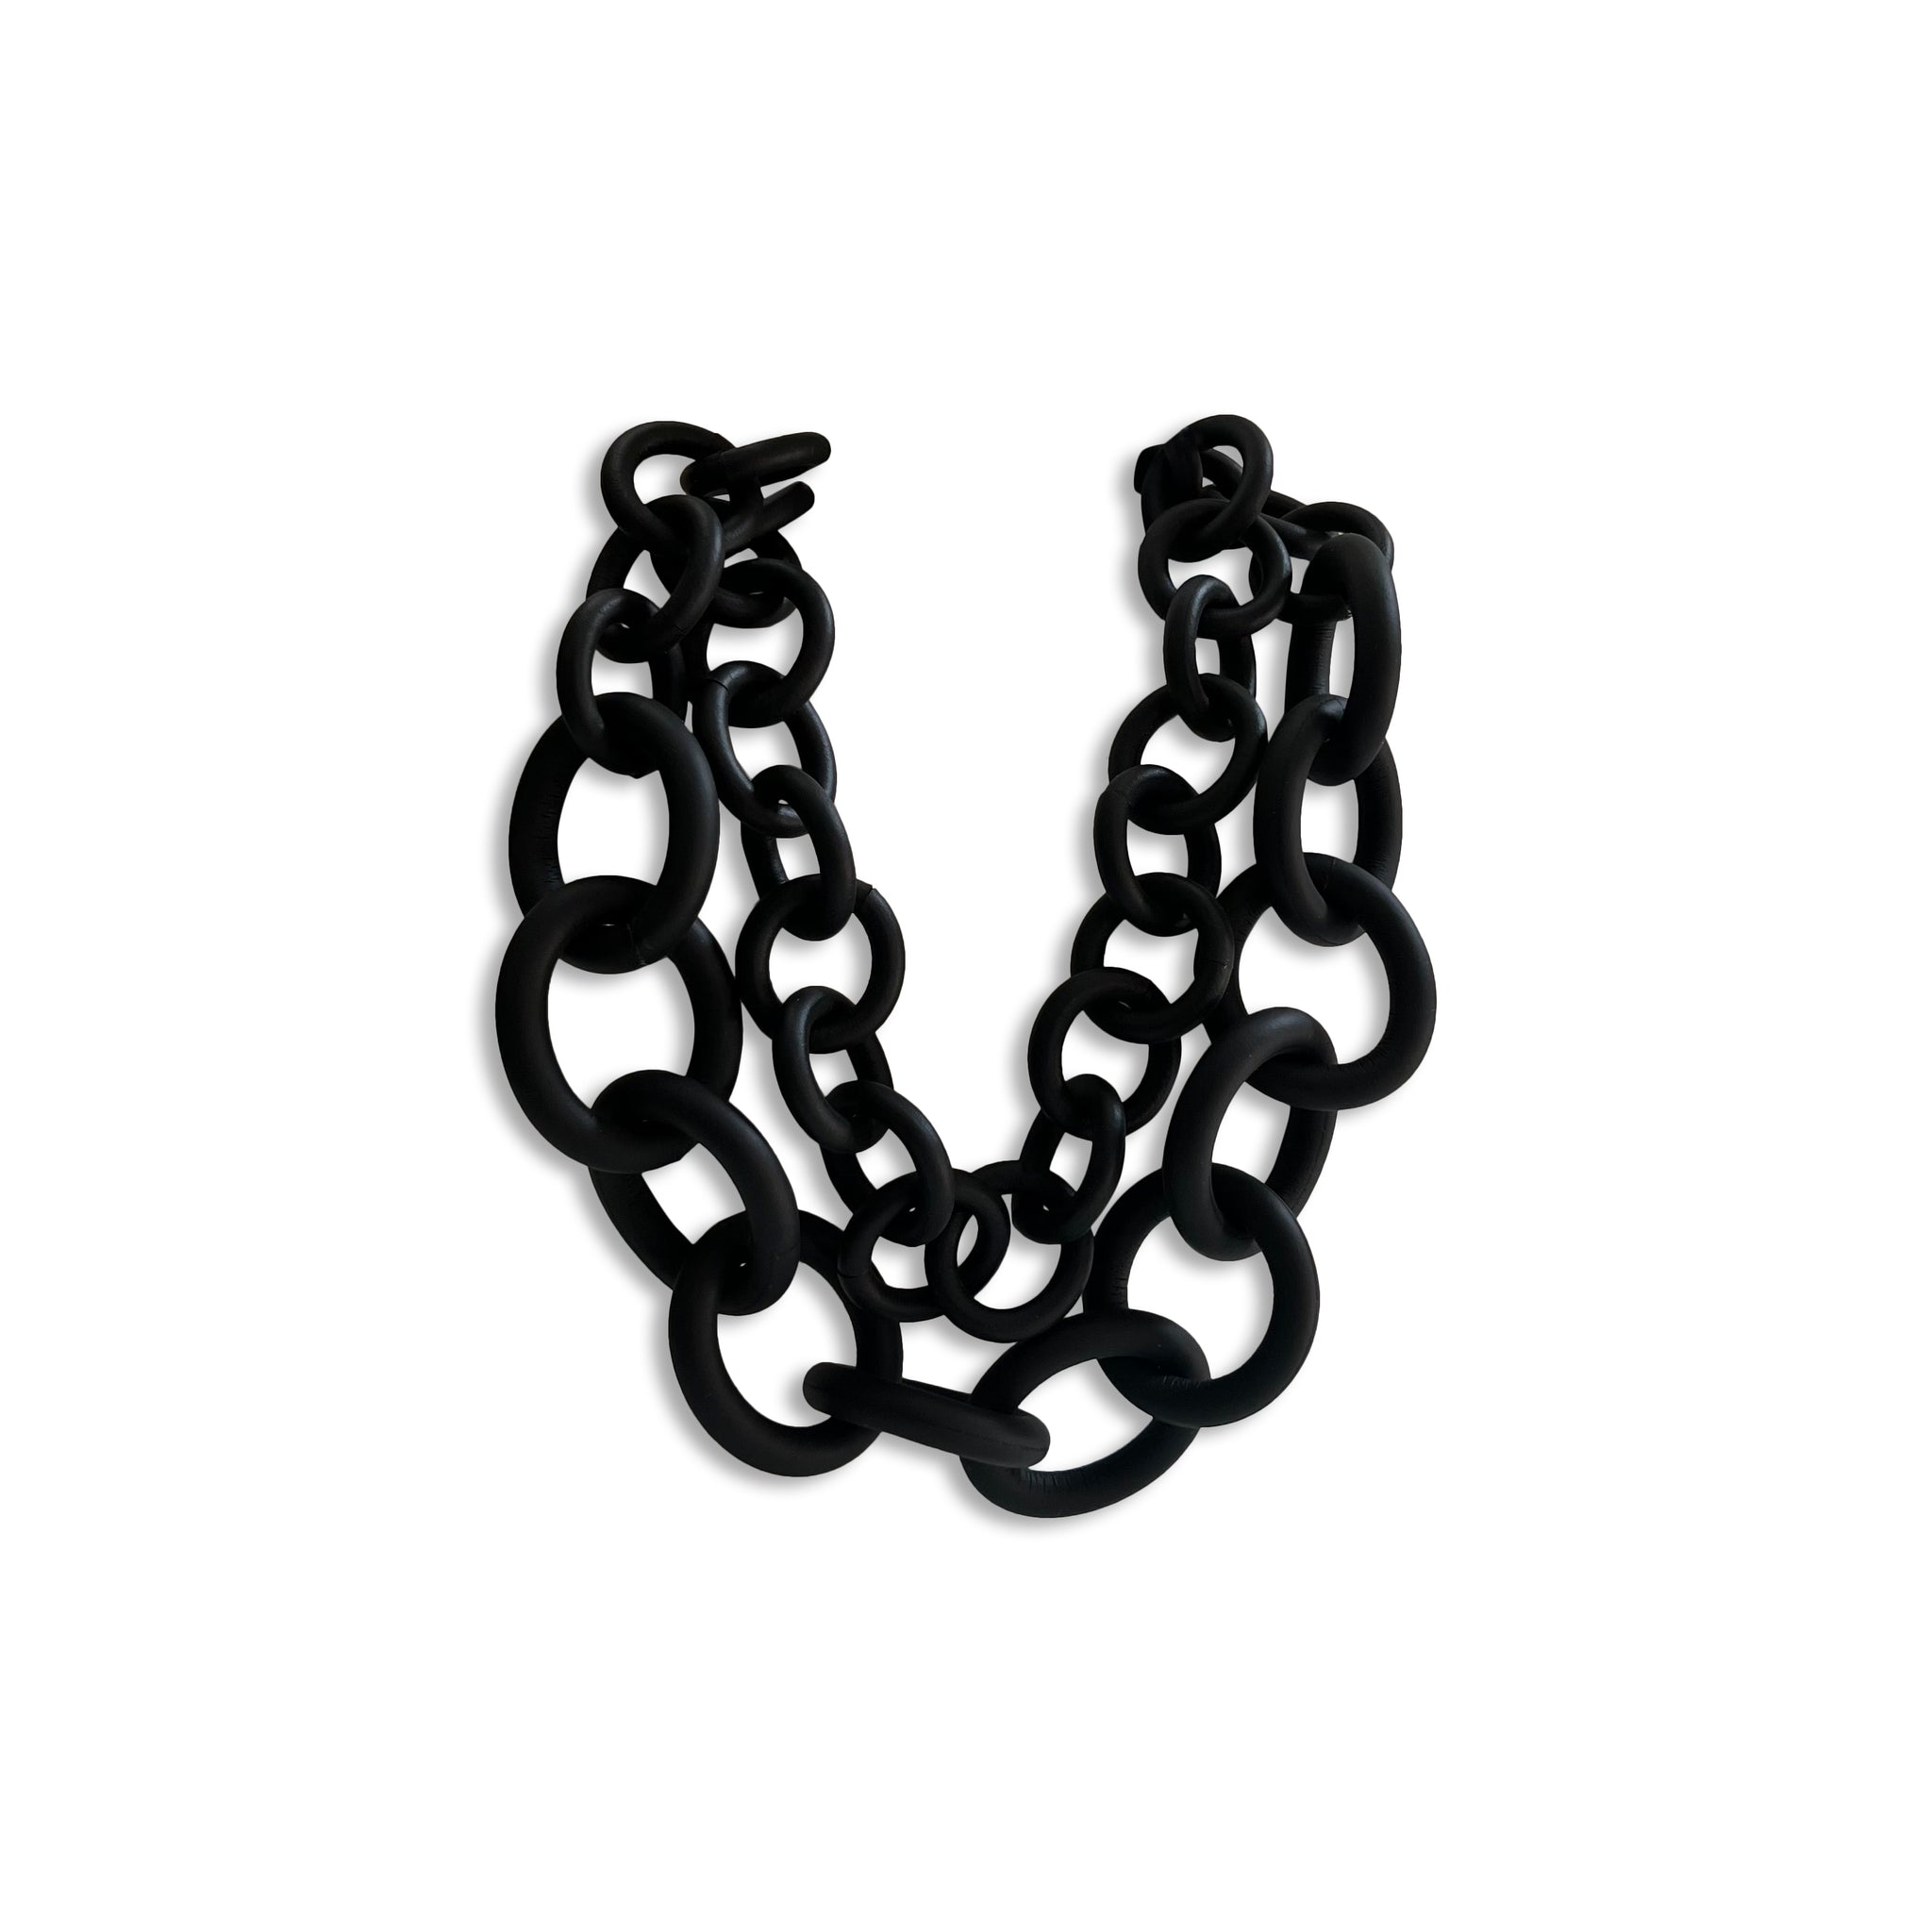 Double strand rubber necklace